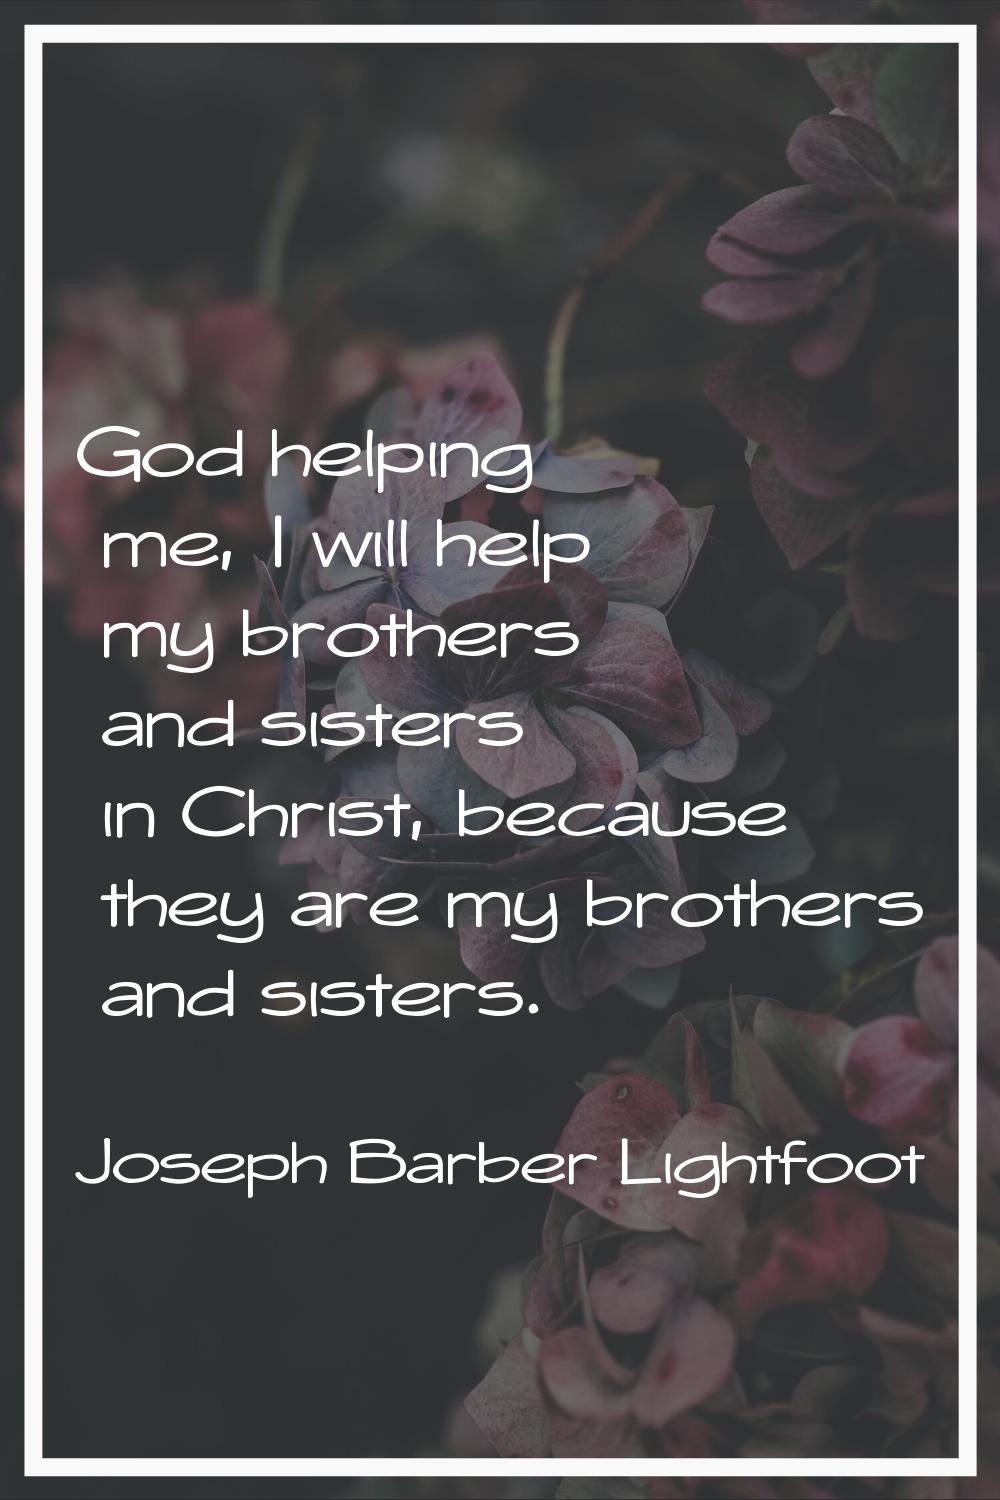 God helping me, I will help my brothers and sisters in Christ, because they are my brothers and sis